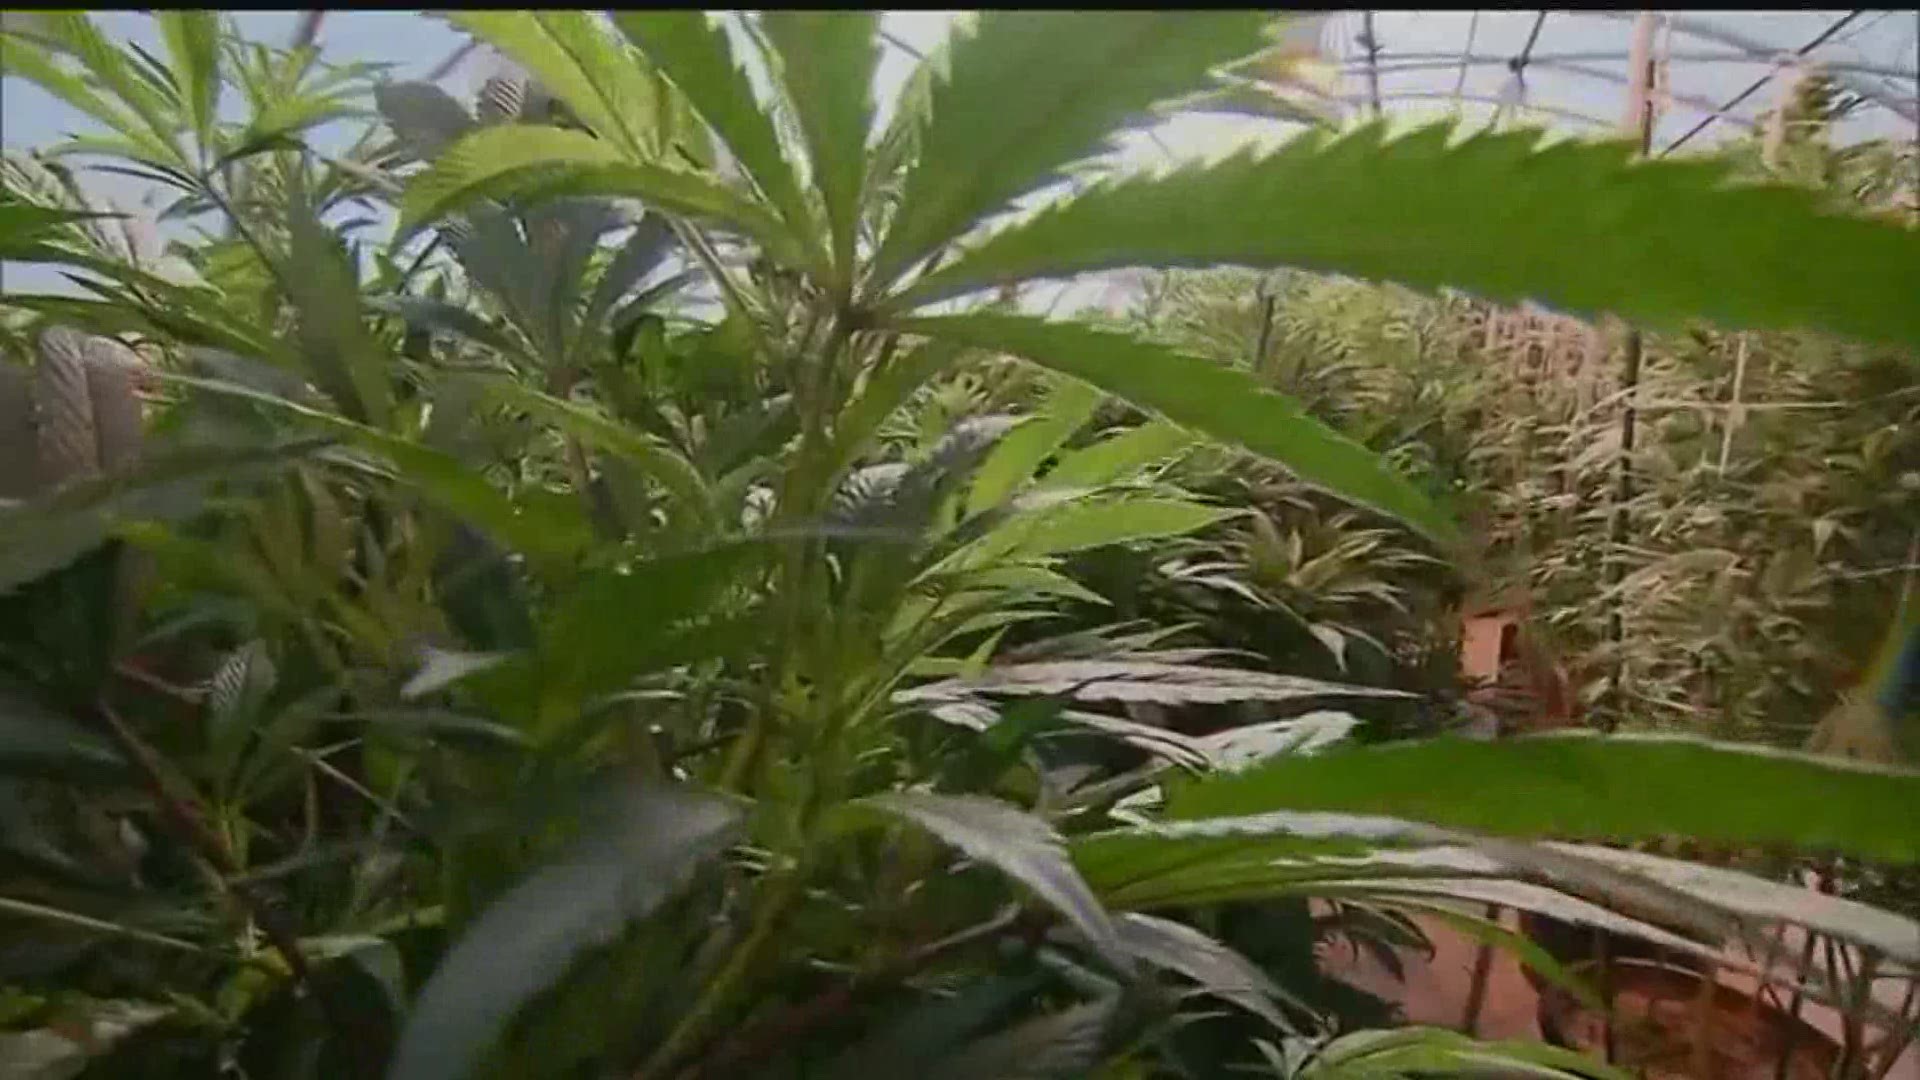 A new bill has been introduced to the house, looking to legalize recreational marijuana use in the commonwealth.